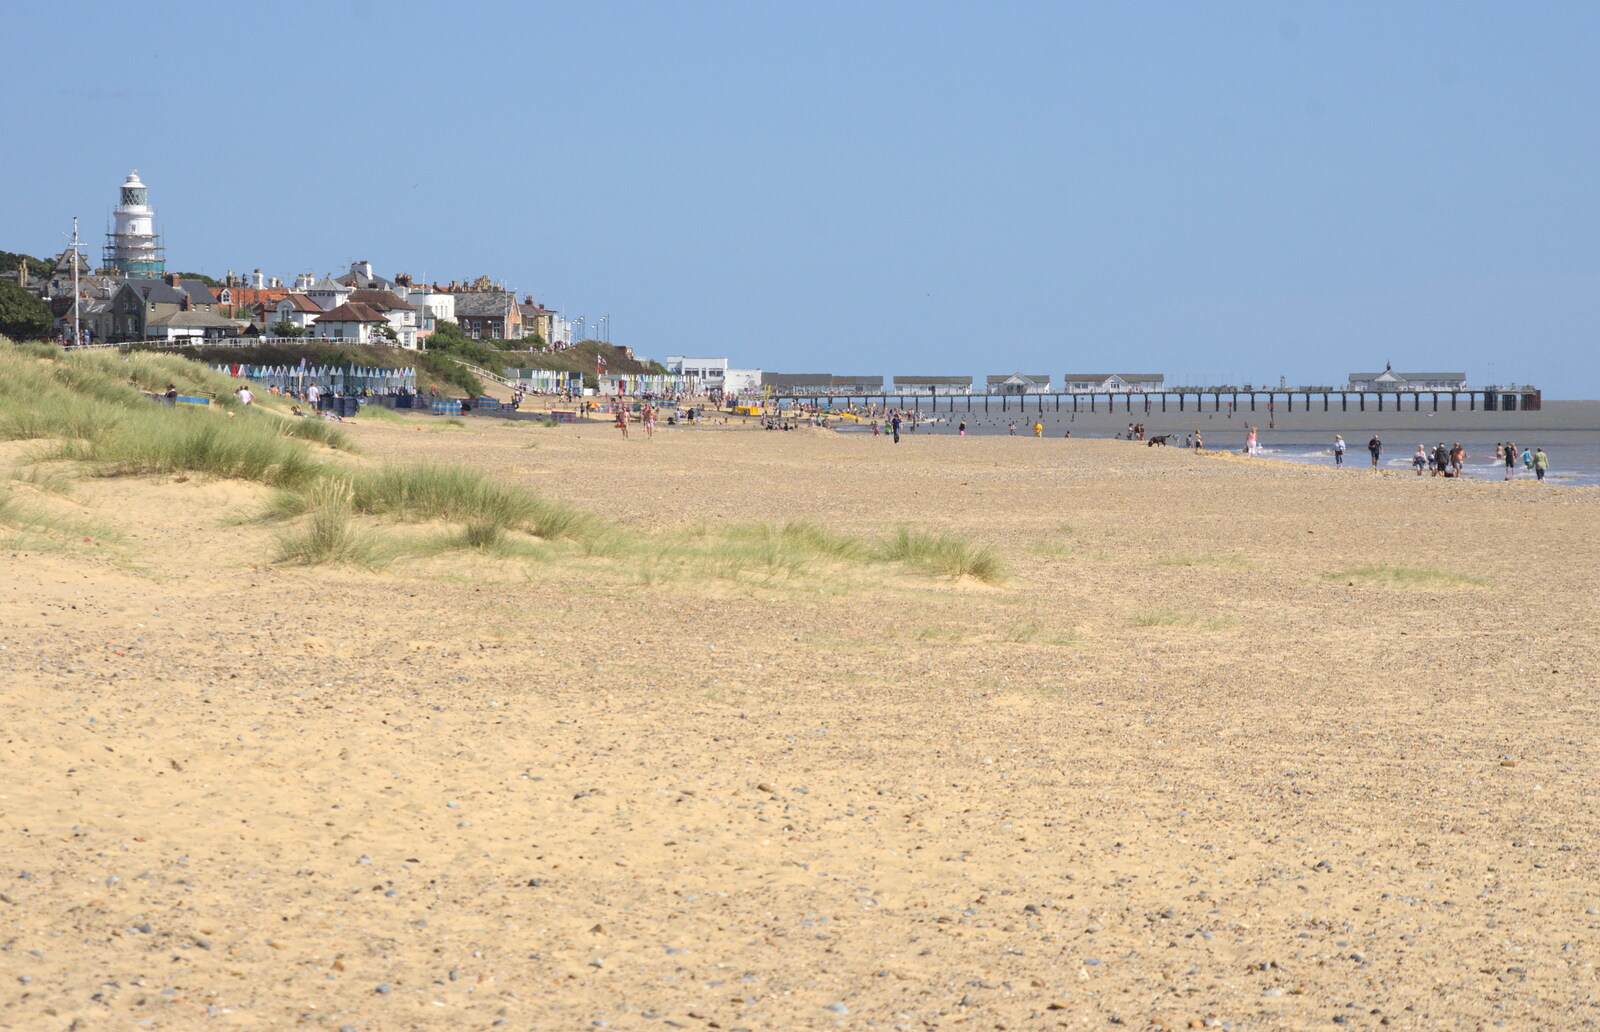 Lighthouse and pier by day from The Danger of Trees: A Camping (Mis)adventure - Southwold, Suffolk - 3rd August 2015